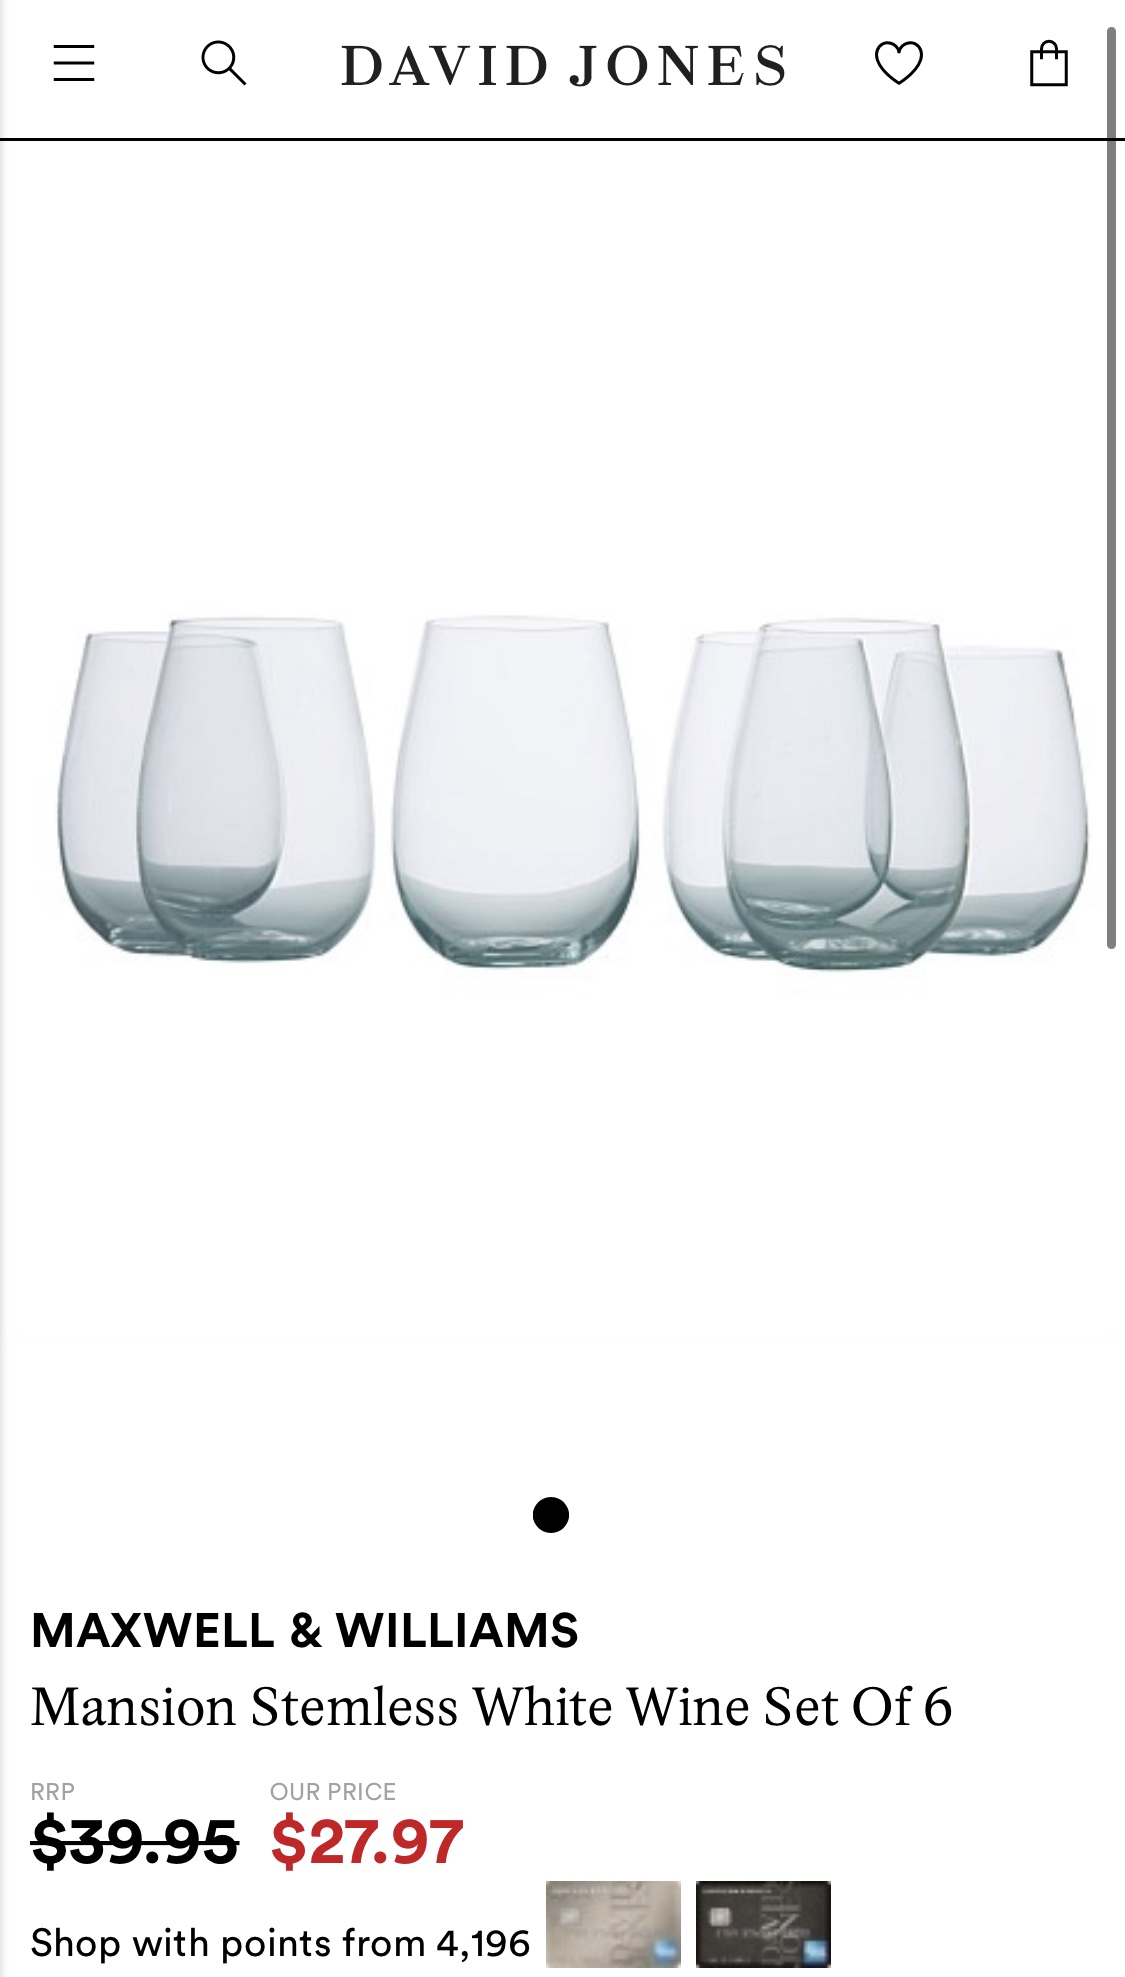 Maxwell & Williams Mansion Stemless White Wine Glass Set of 6